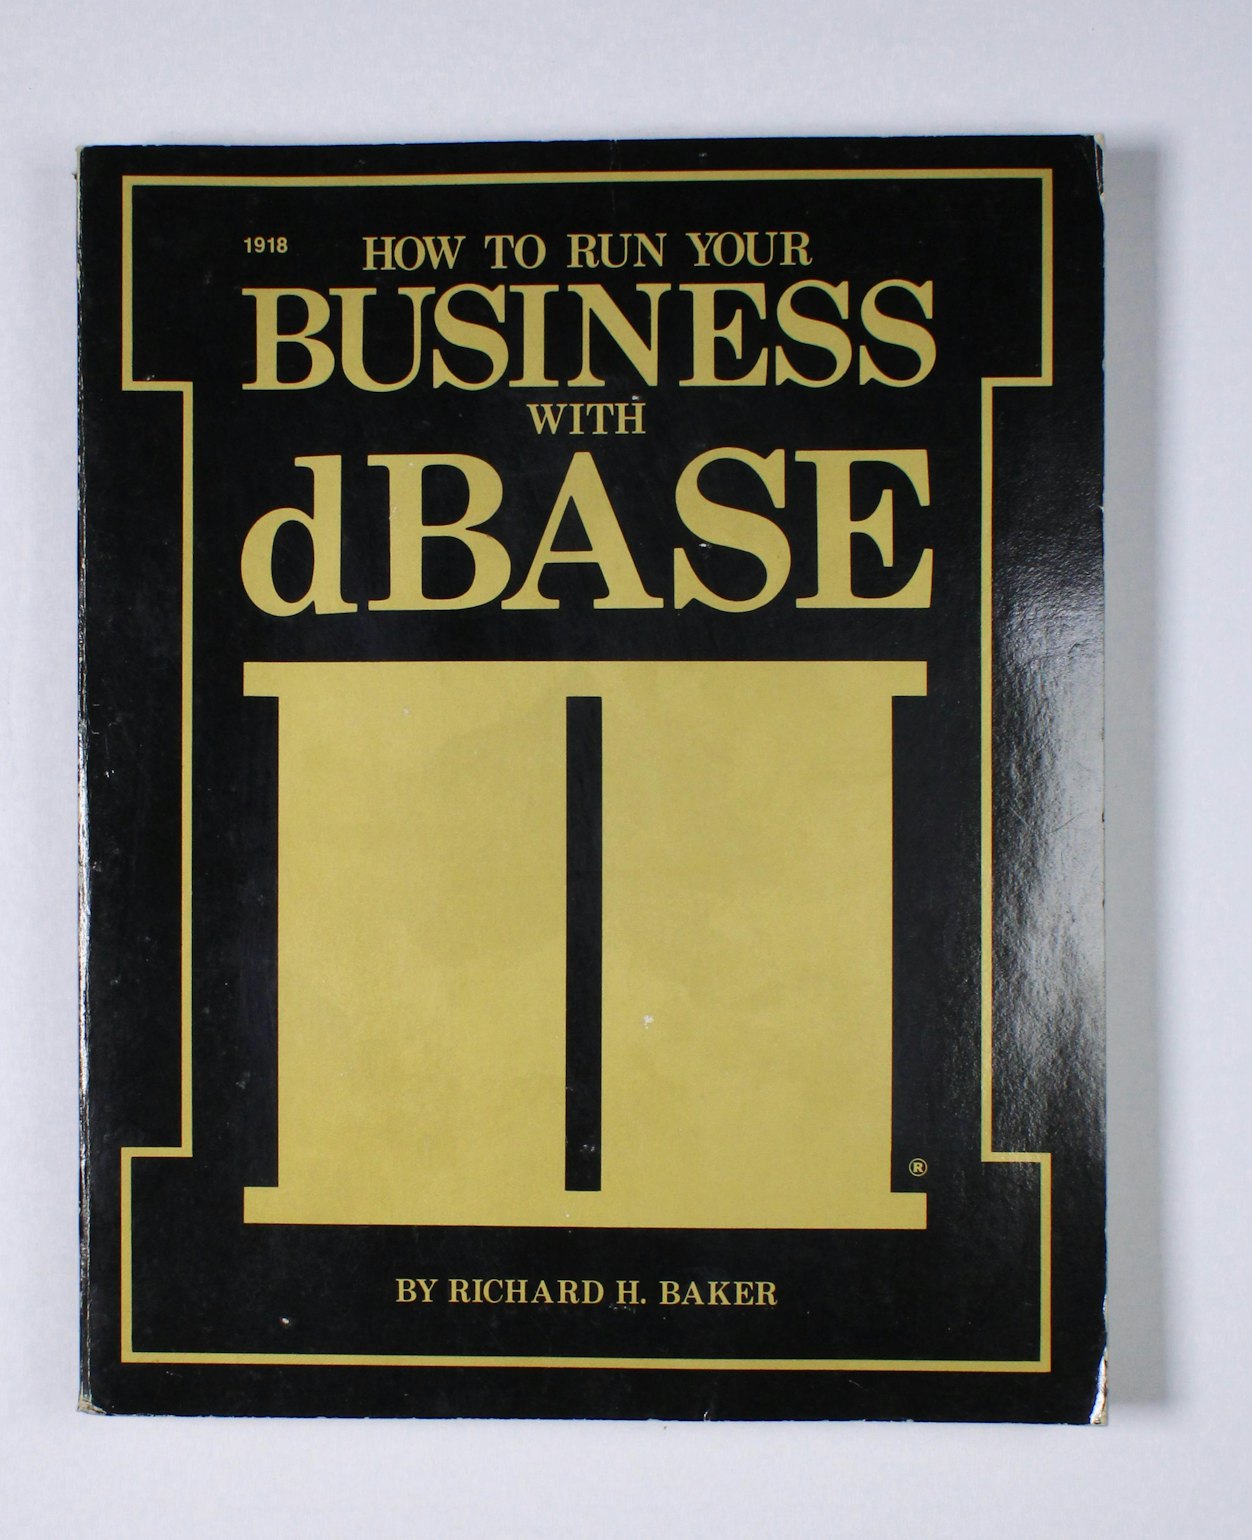 How to Run Your Business with dBase